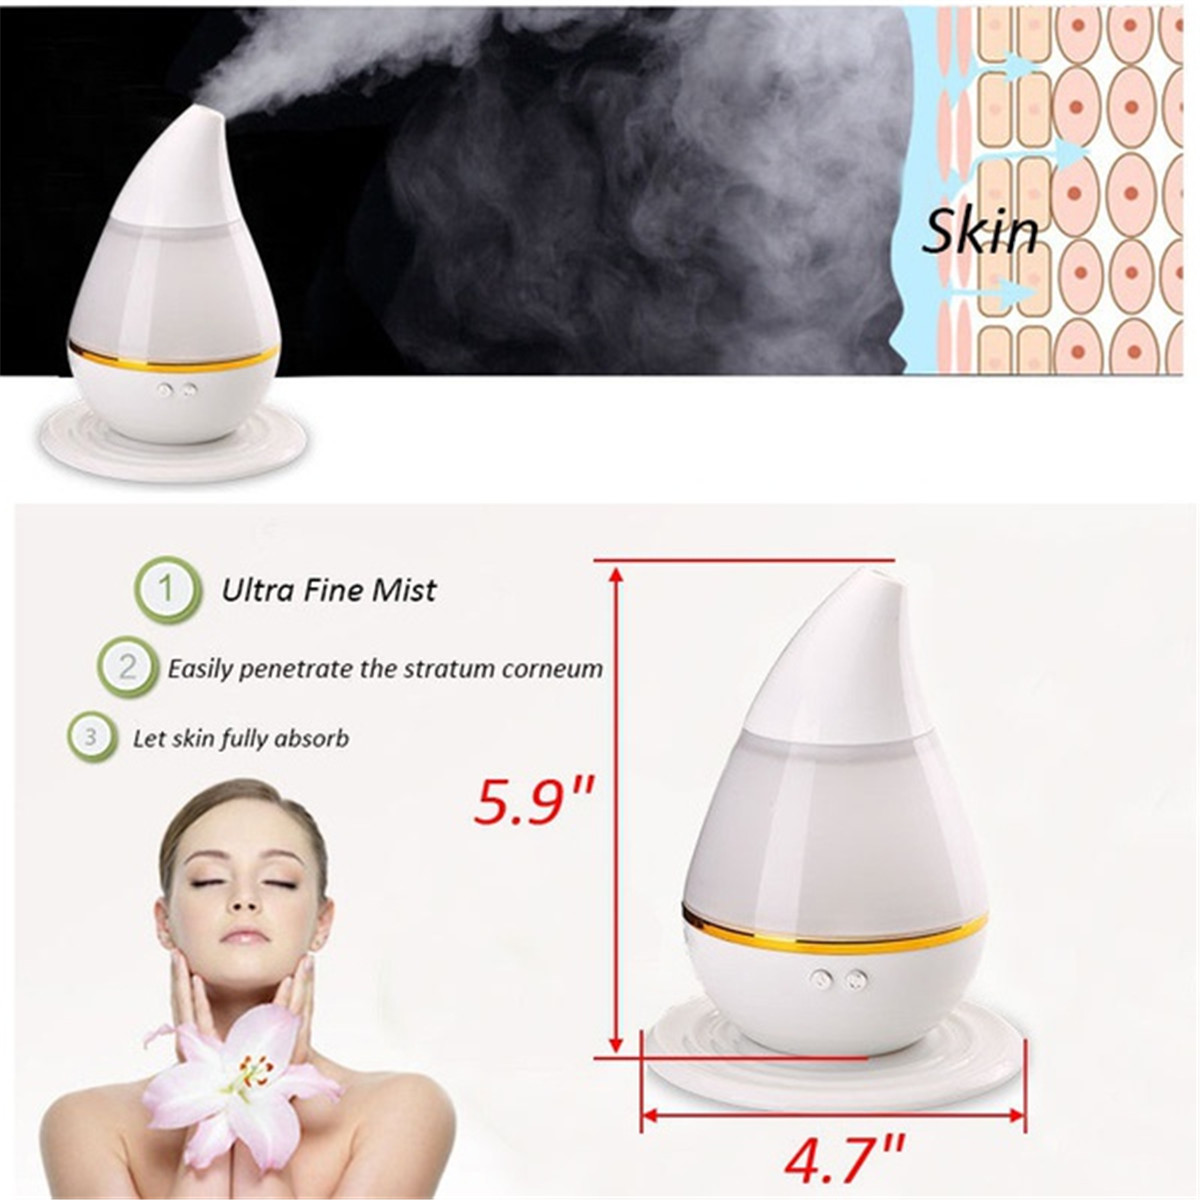 250ml-Ultrasonic-Air-Humidifier-USB-Charging-Essential-Oil-Diffuser-LED-Light-Purifier-for-Home-Offi-1787140-6